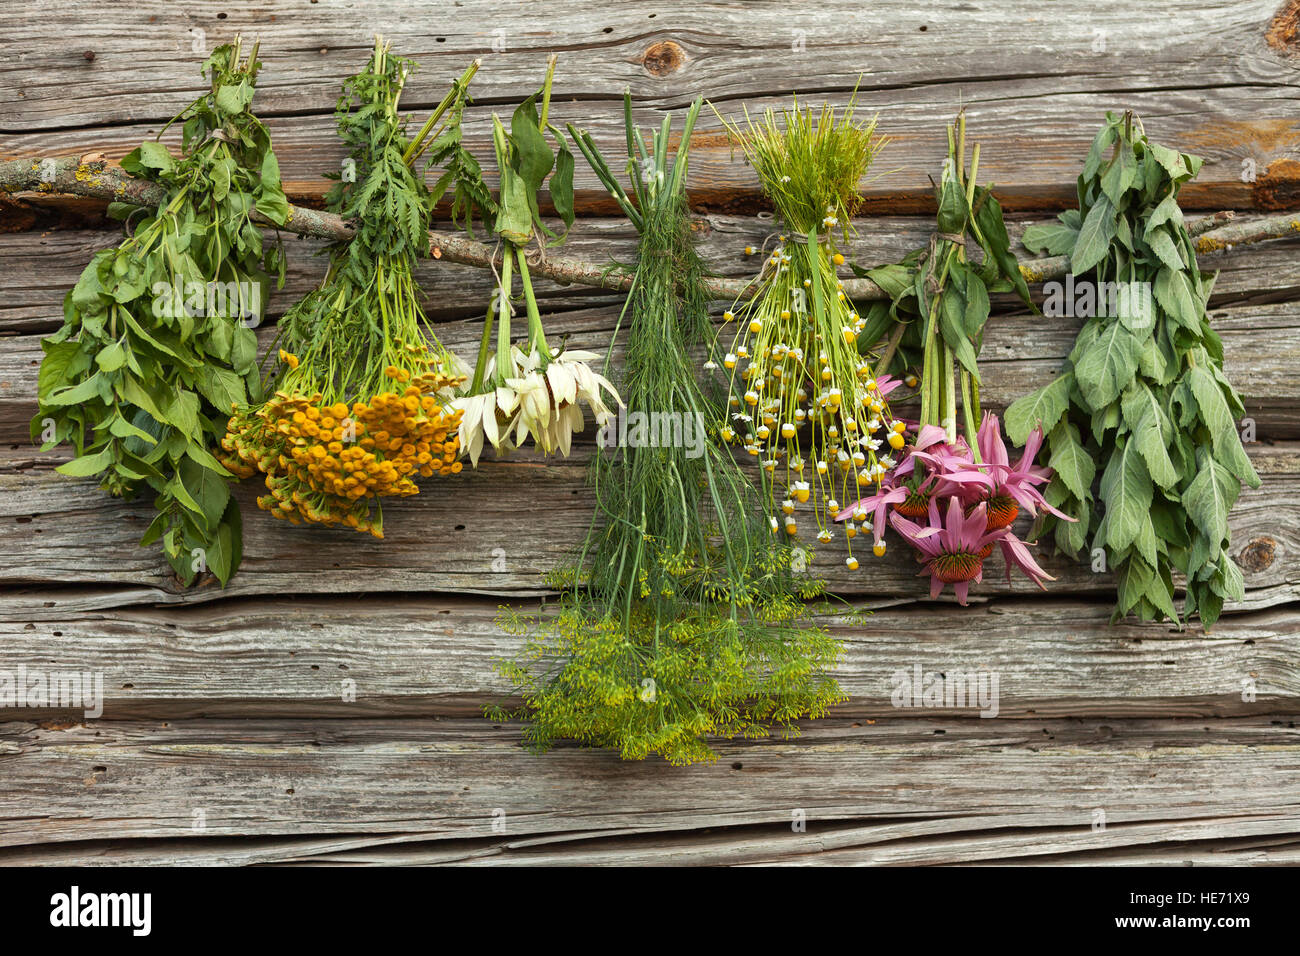 Drying medical herbs in a shadow: echinacea,chamomile,dill,tansy,melissa. Stock Photo